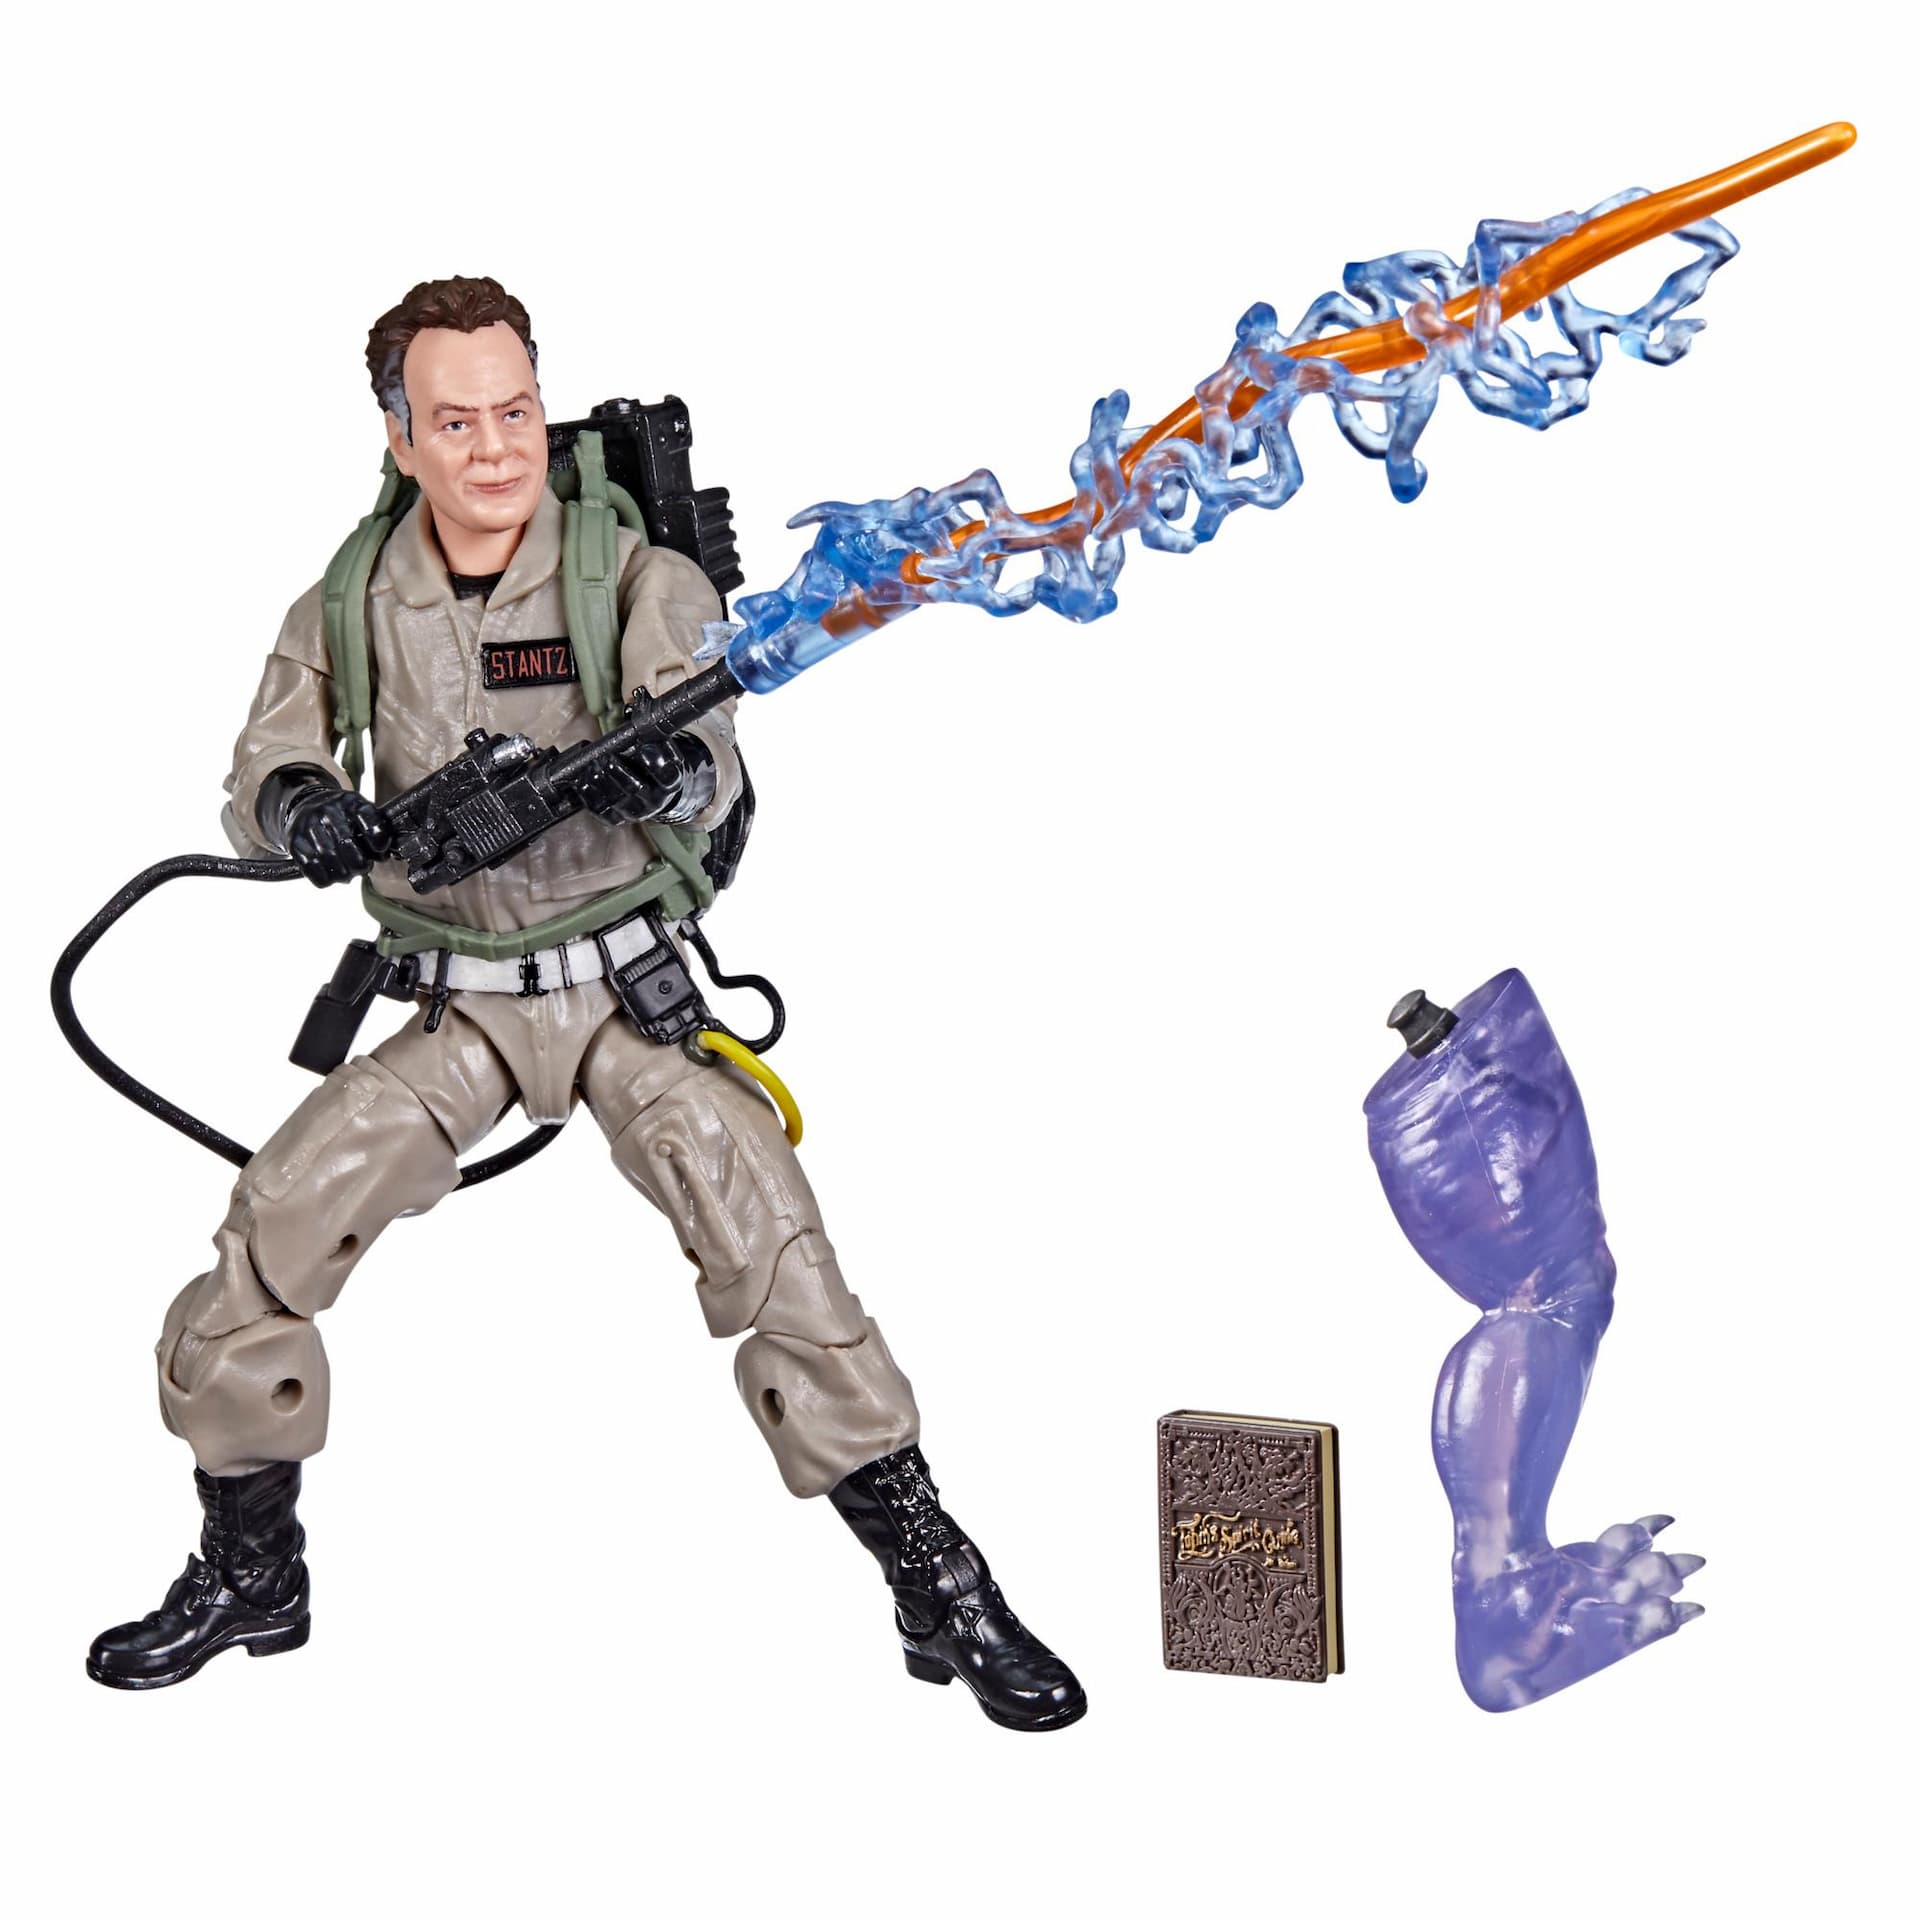 Ghostbusters Plasma Series Ray Stantz Toy 6-Inch-Scale Collectible Ghostbusters: Afterlife Figure, Ages 4 and Up